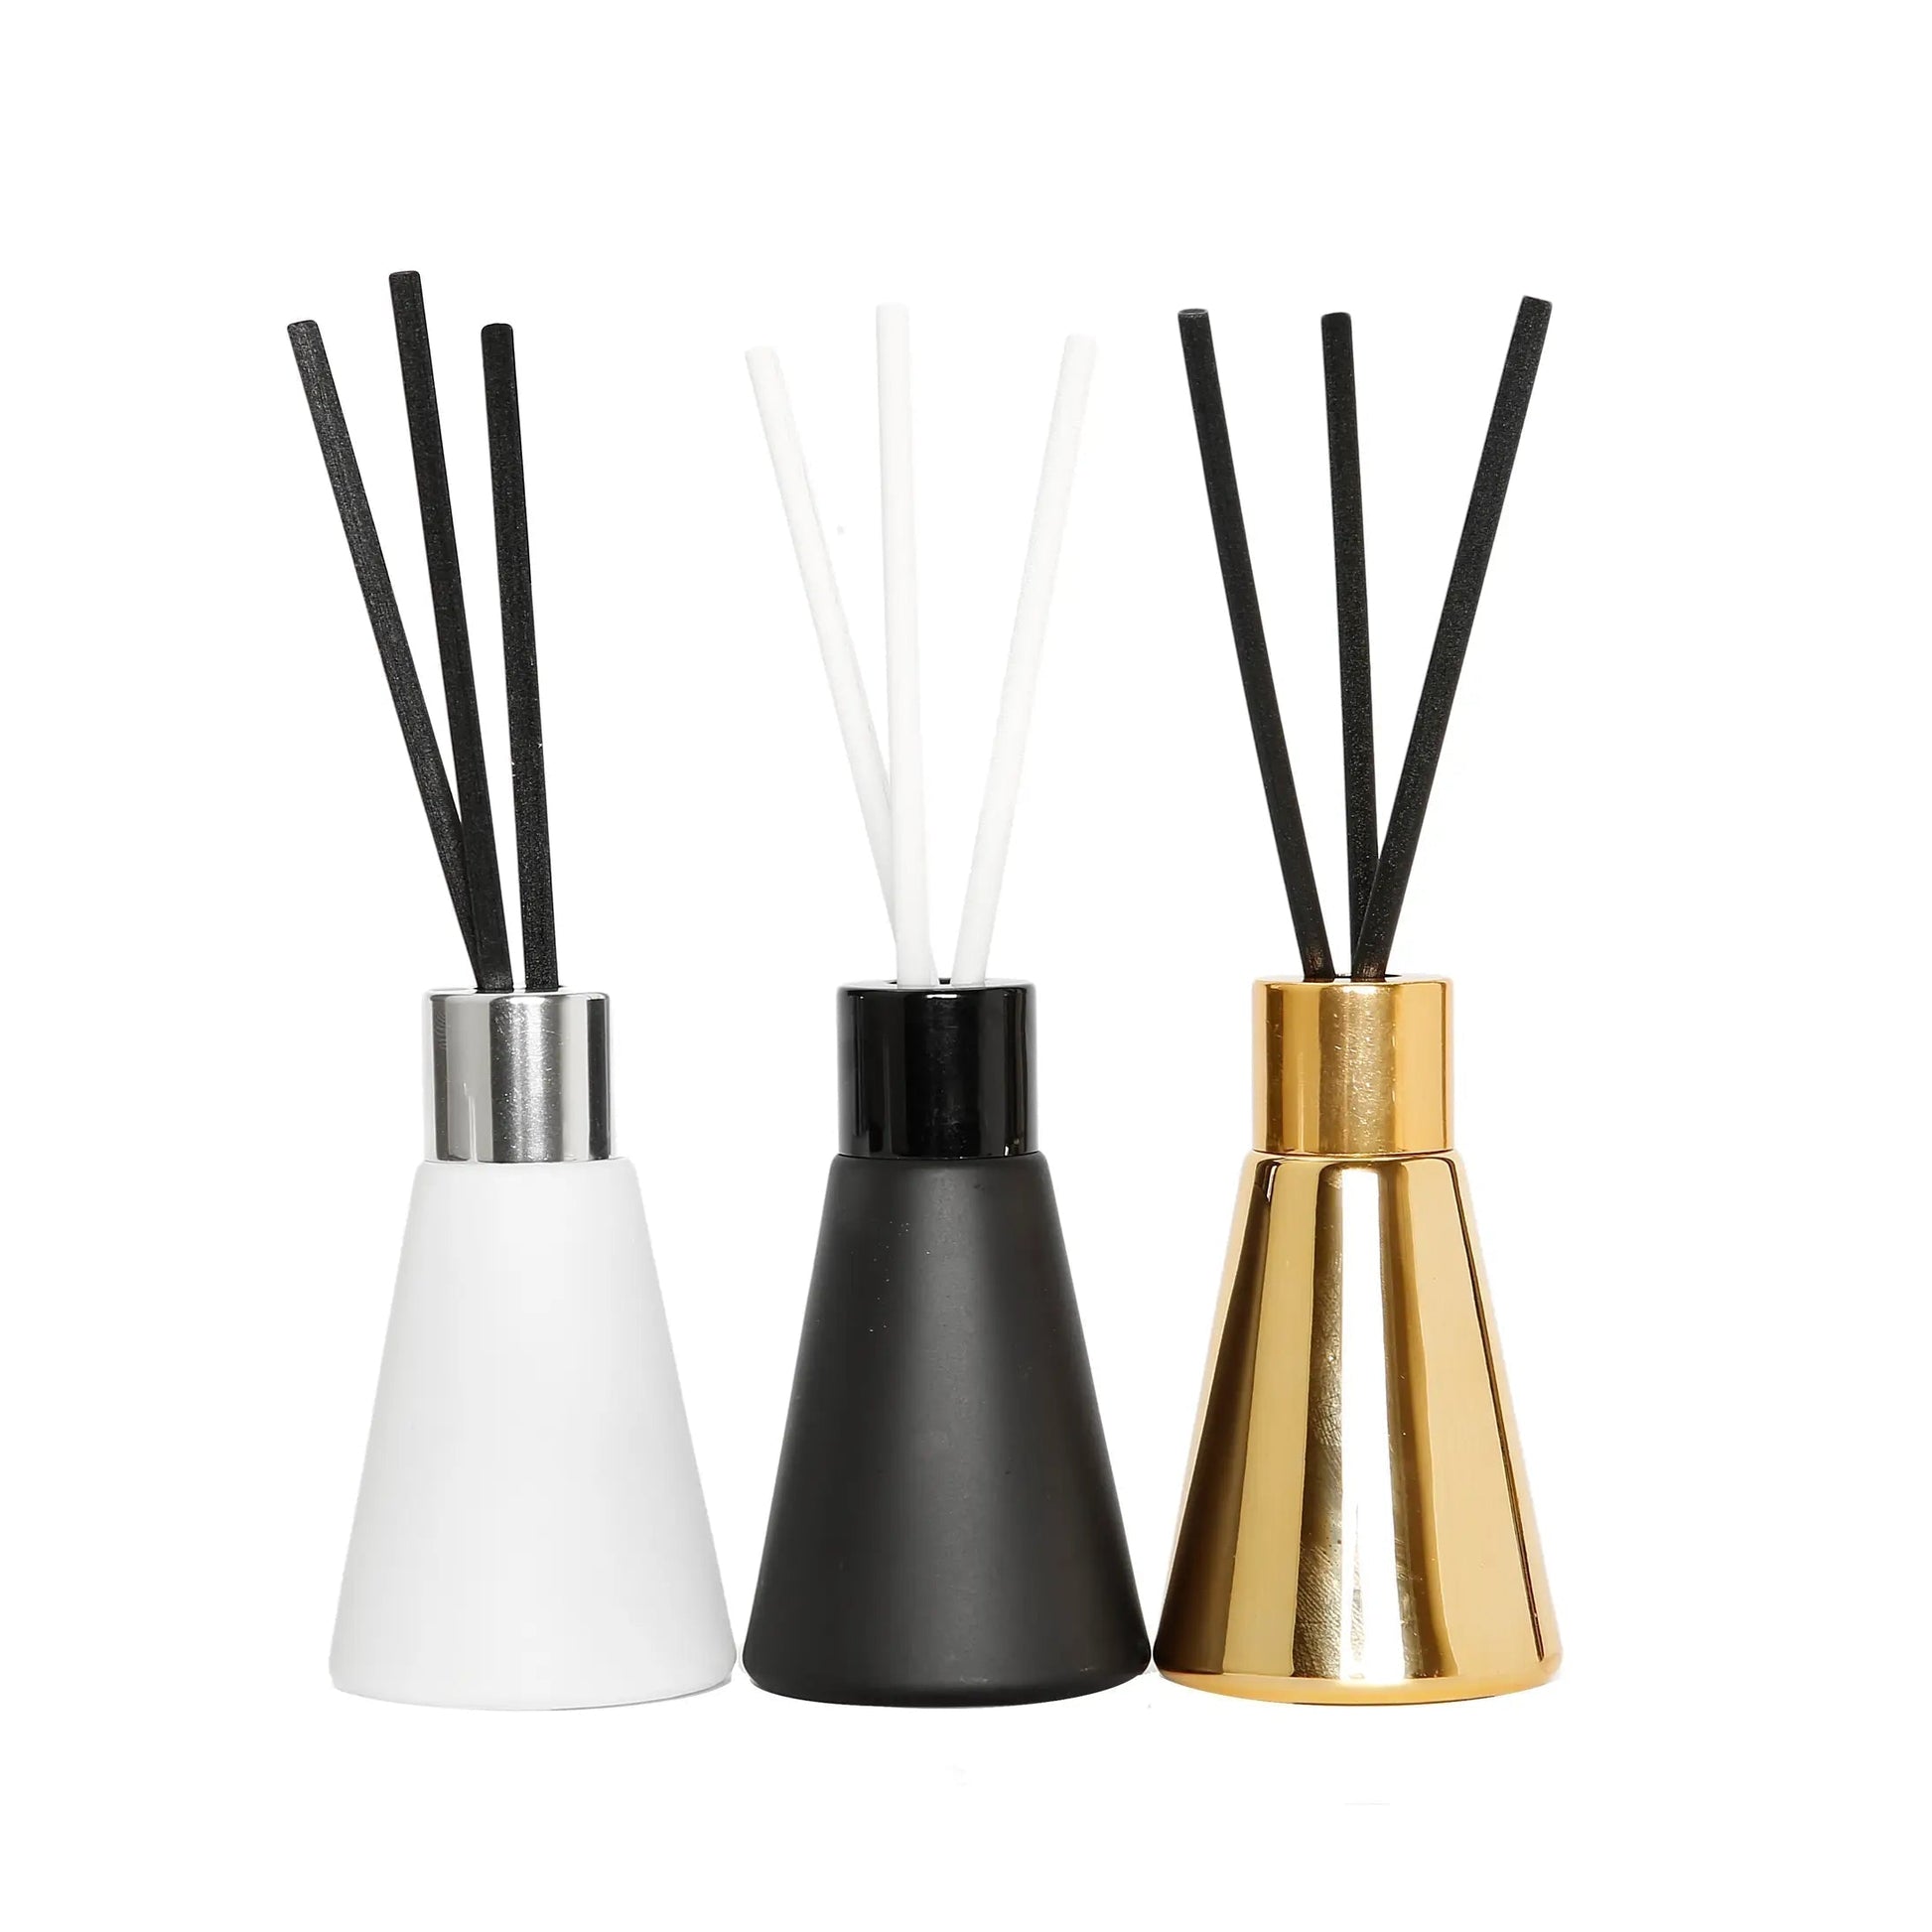 White, Black & Gold Gift Diffuser Set of 3 Diffuser High Class Touch - Home Decor 